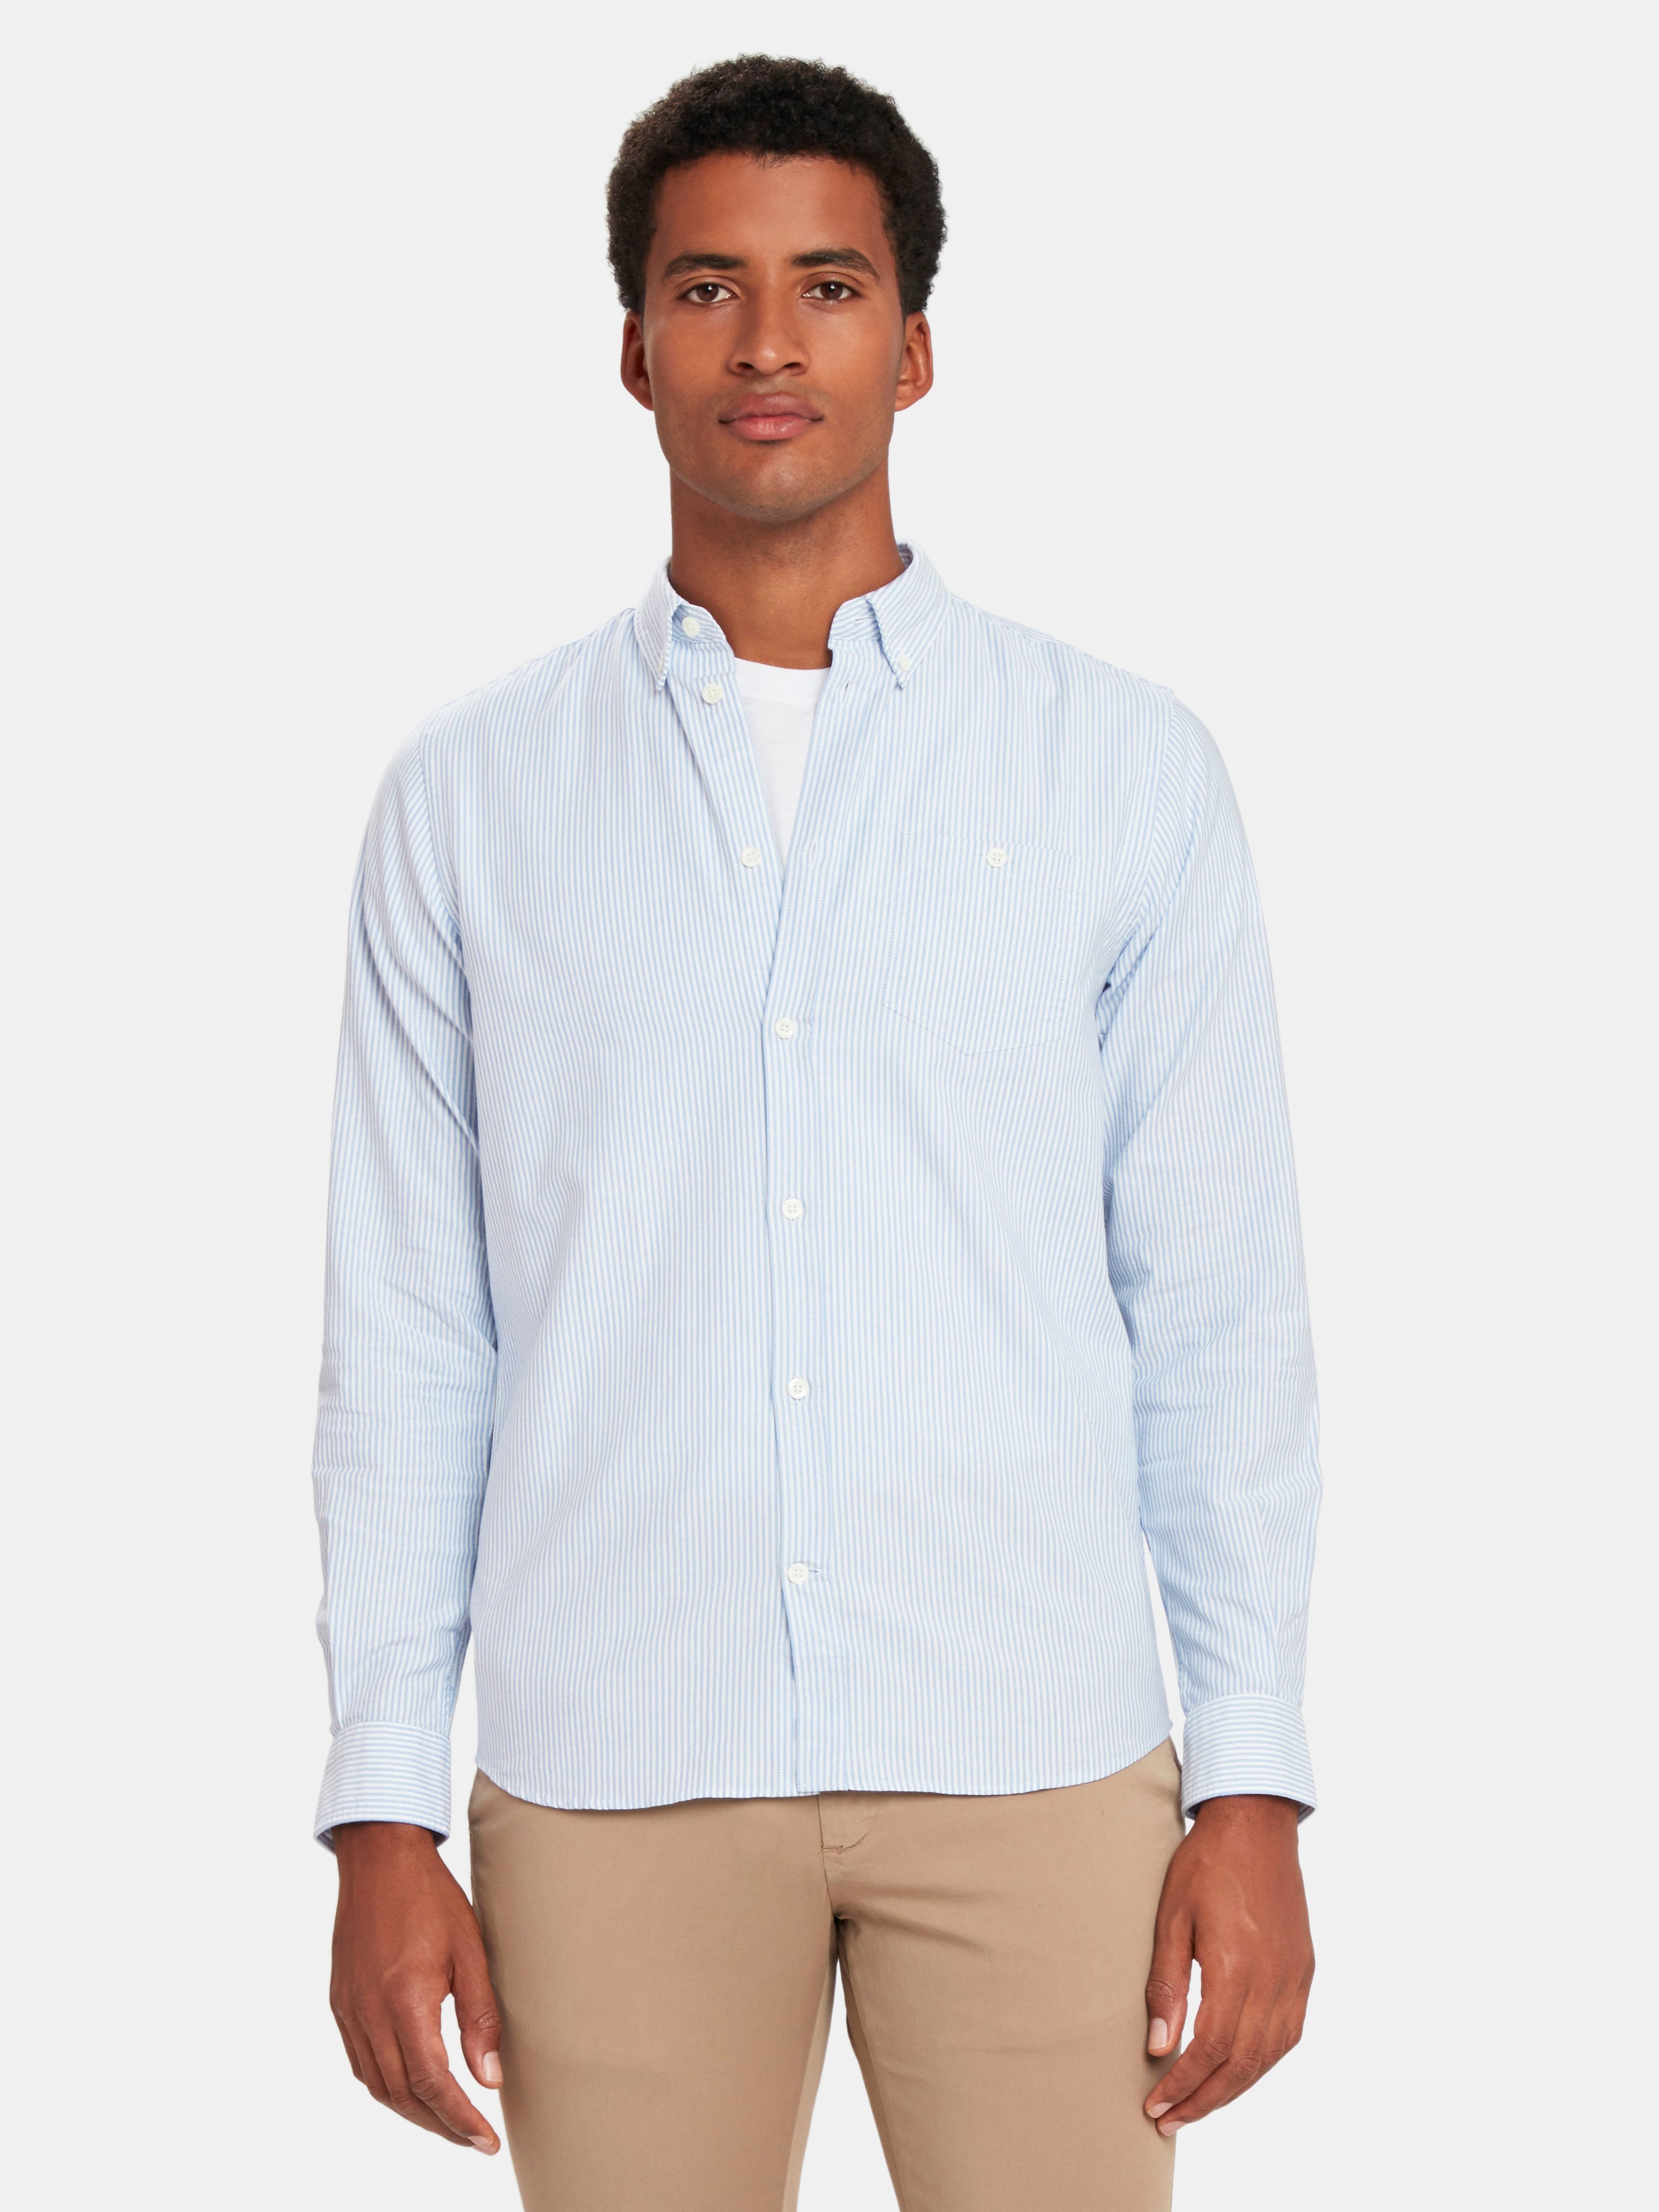 Norse Projects Anton Oxford Shirt In Blue Stripe 7110